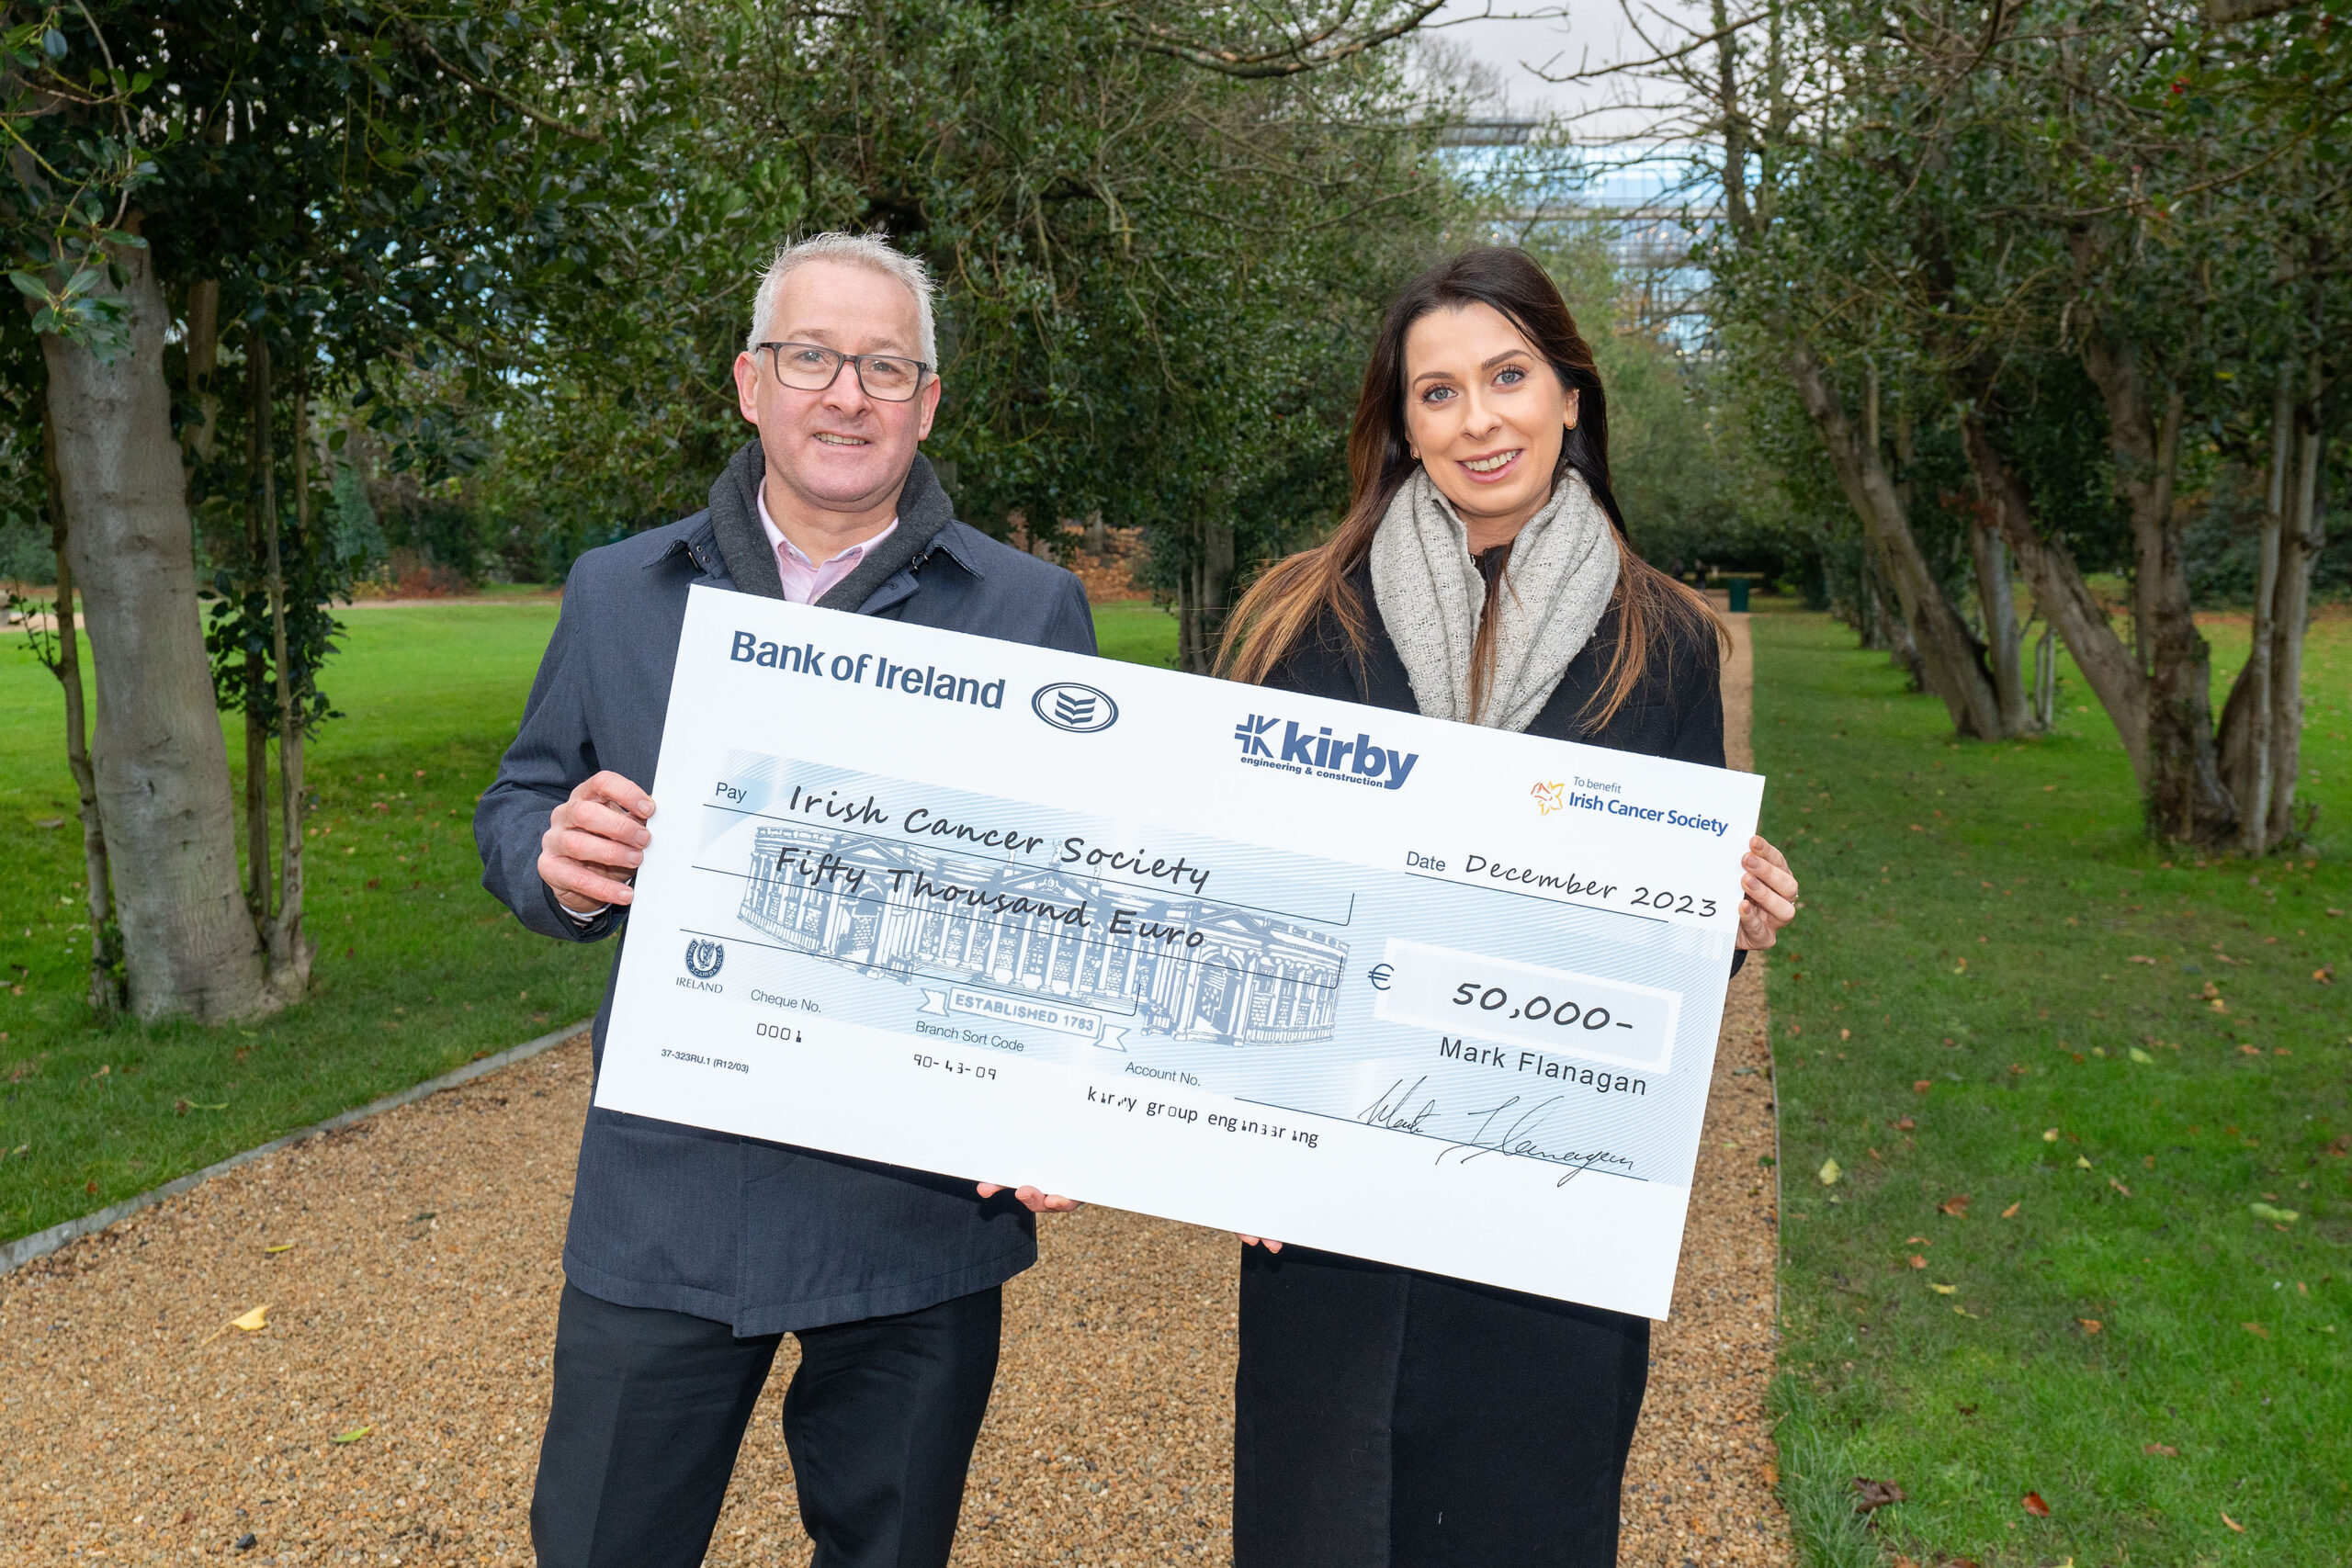 Kirby Group Managing Director, Mark Flanagan, presents Alison Reynolds, Corporate Partnerships Officer, from the Irish Cancer Society, with a Christmas donation cheque for €50,000.